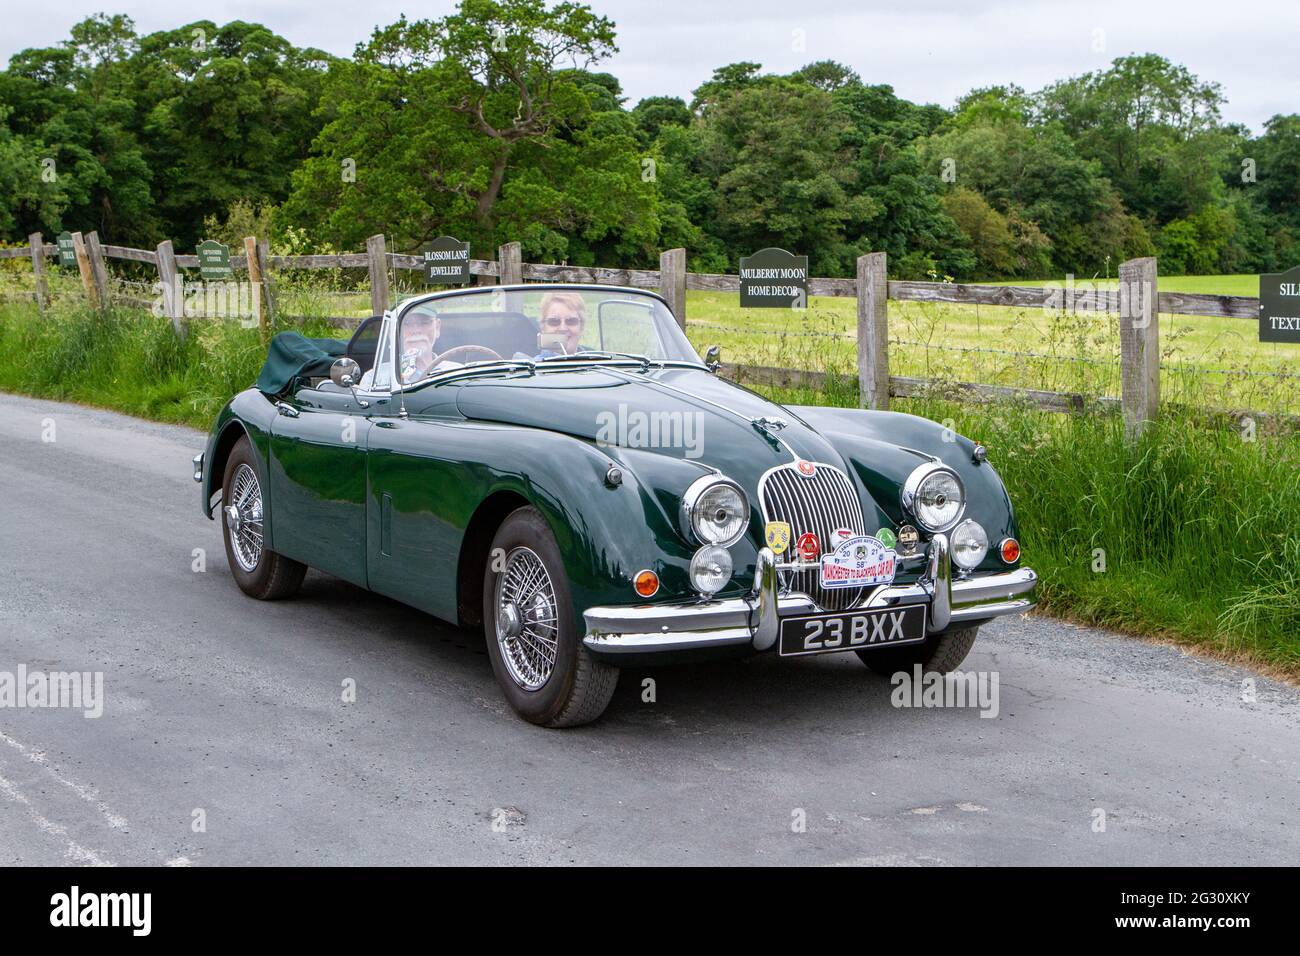 1961 60s green British Jaguar XK 3442cc at the 58th Annual Manchester to Blackpool Vintage & Classic Car Run The event is a ‘Touring Assembly’ Stock Photo